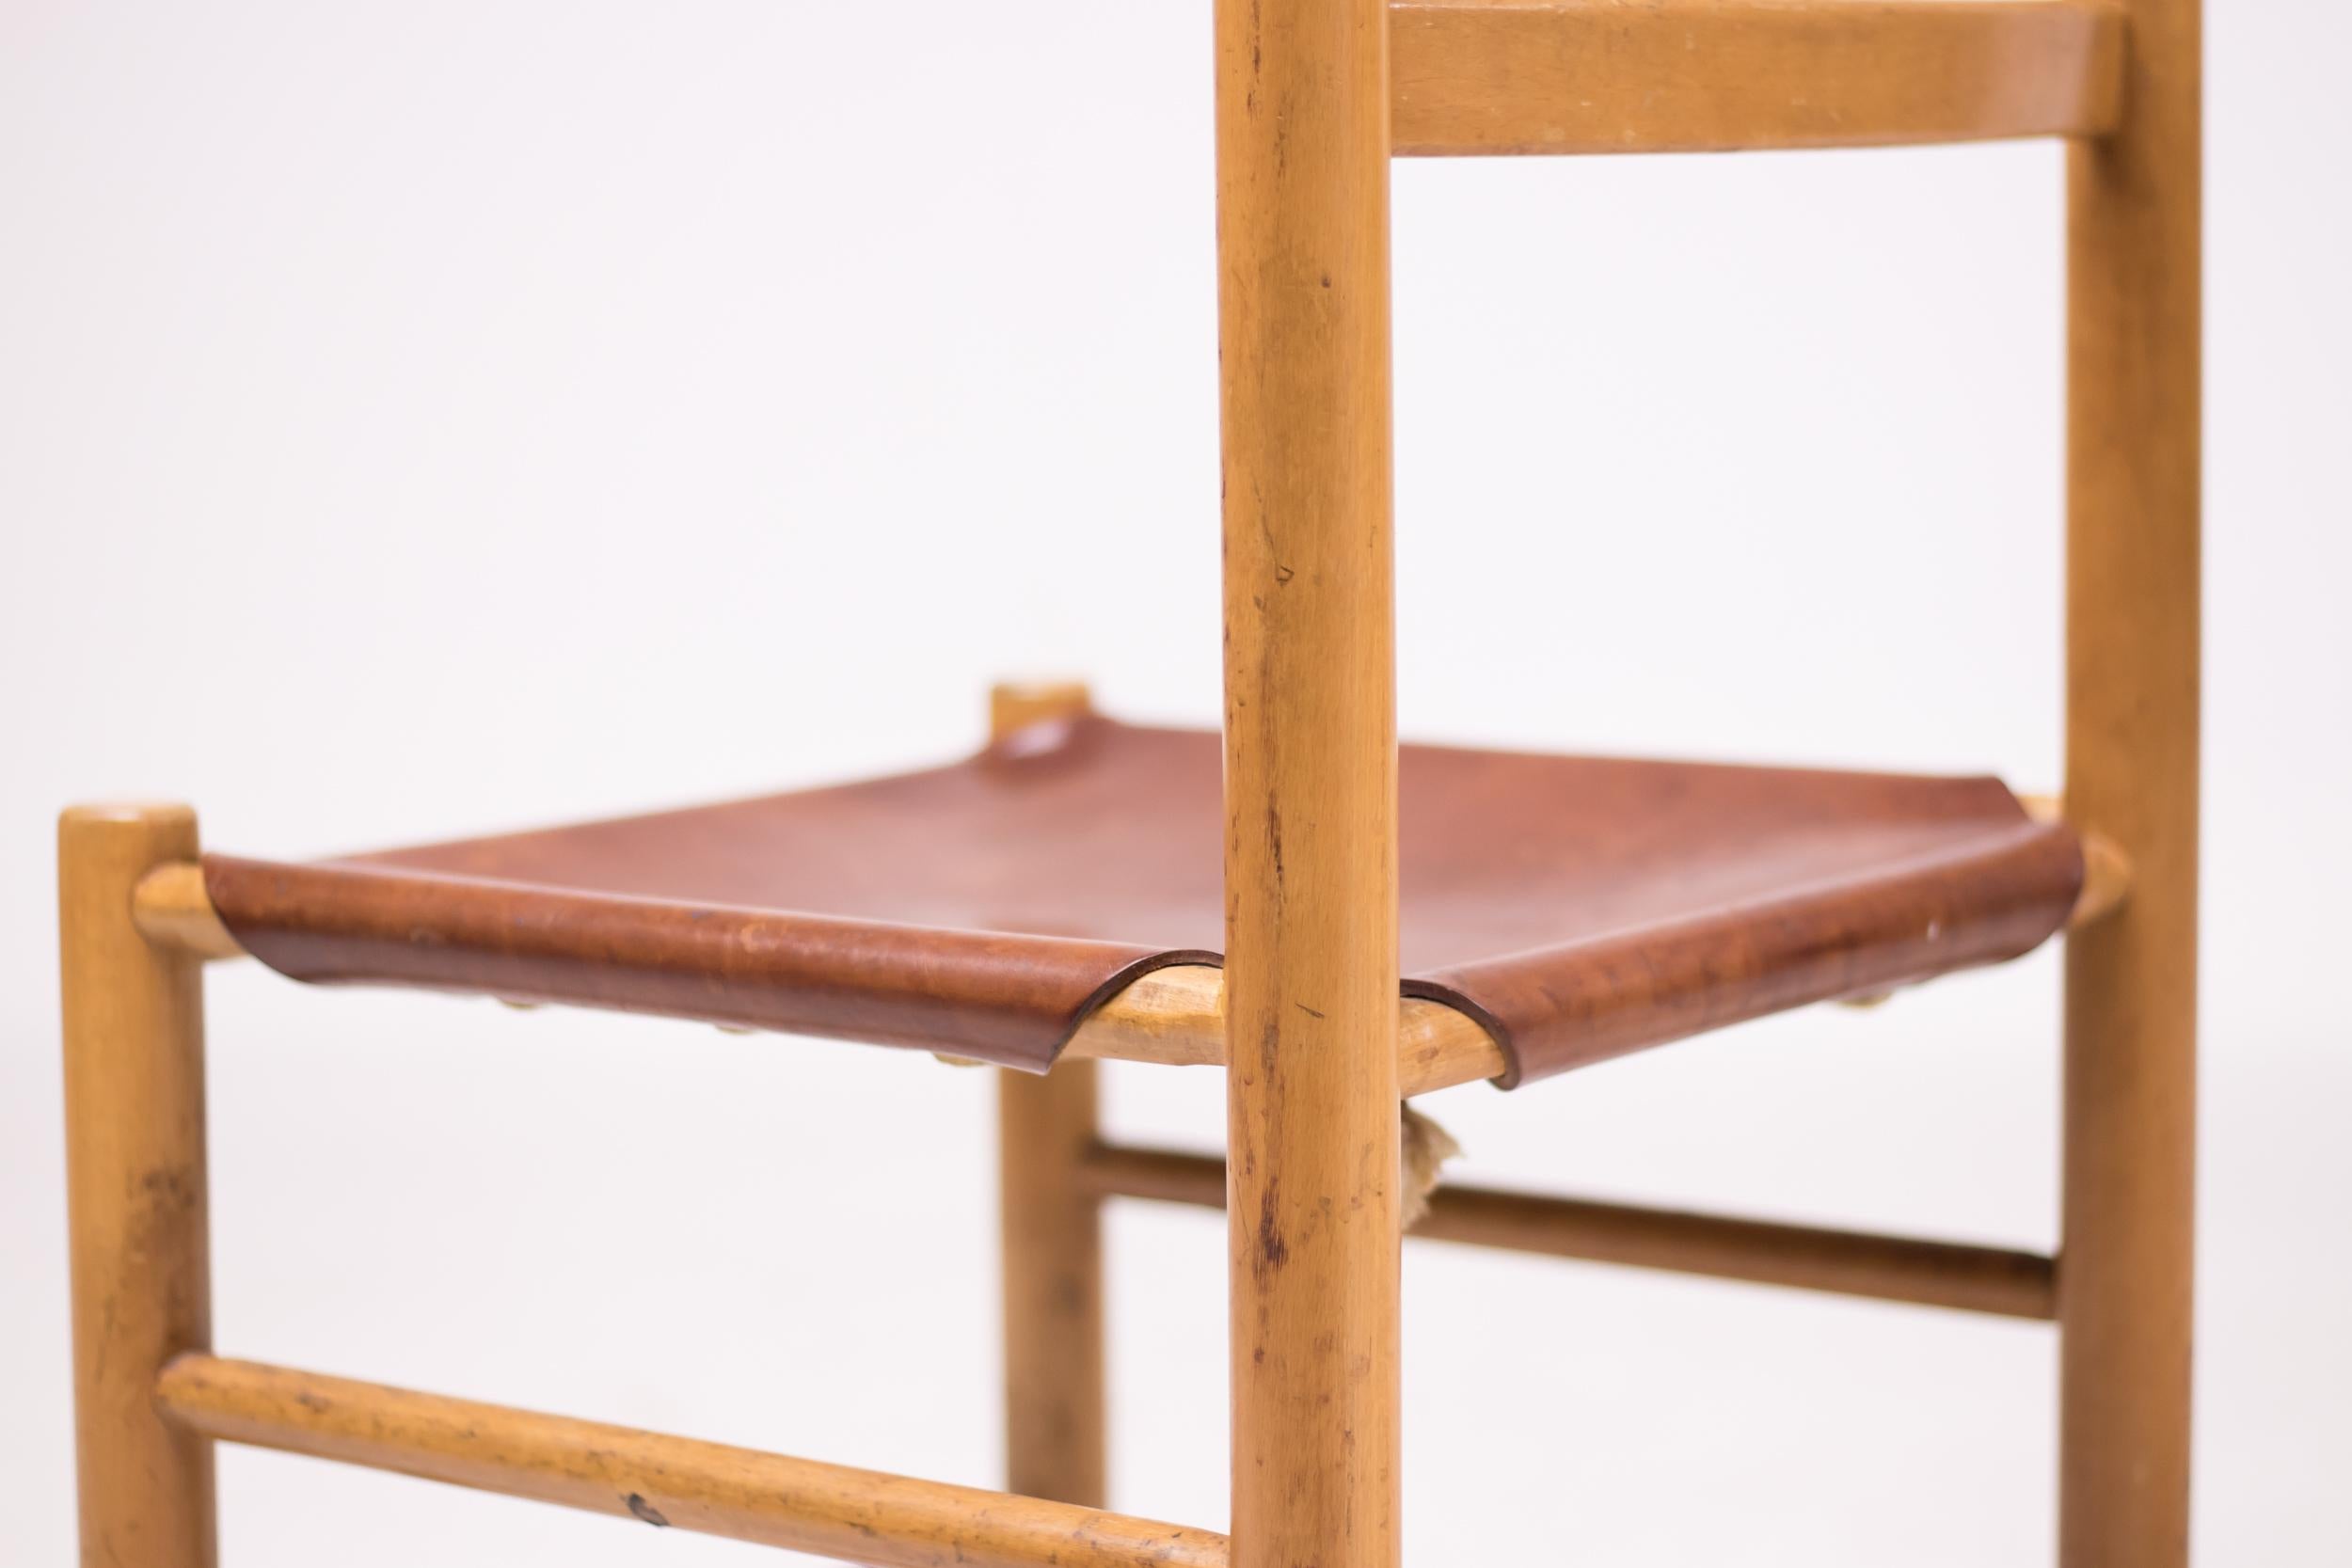 Dutch Pair of Minimalist Chairs in Maple and Saddle Leather